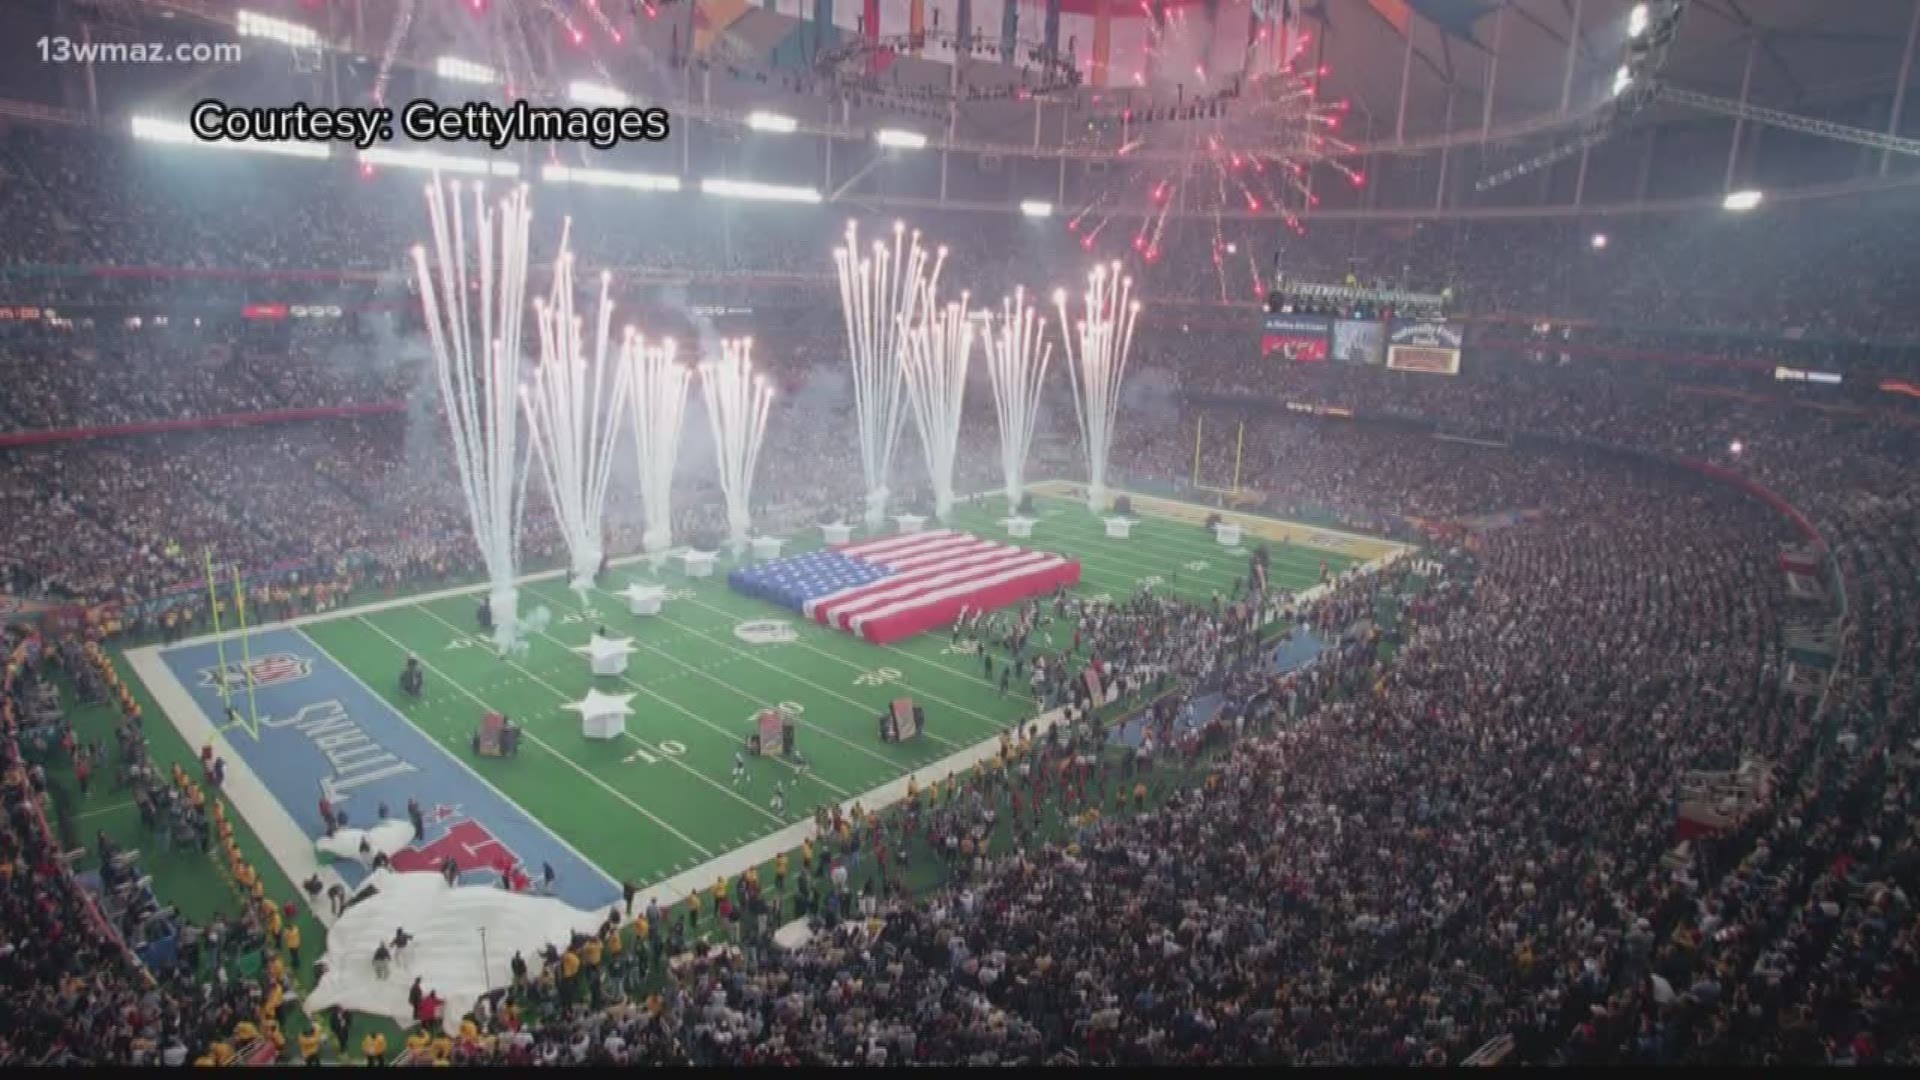 Taking A look back at the Super Bowls Played in Atlanta